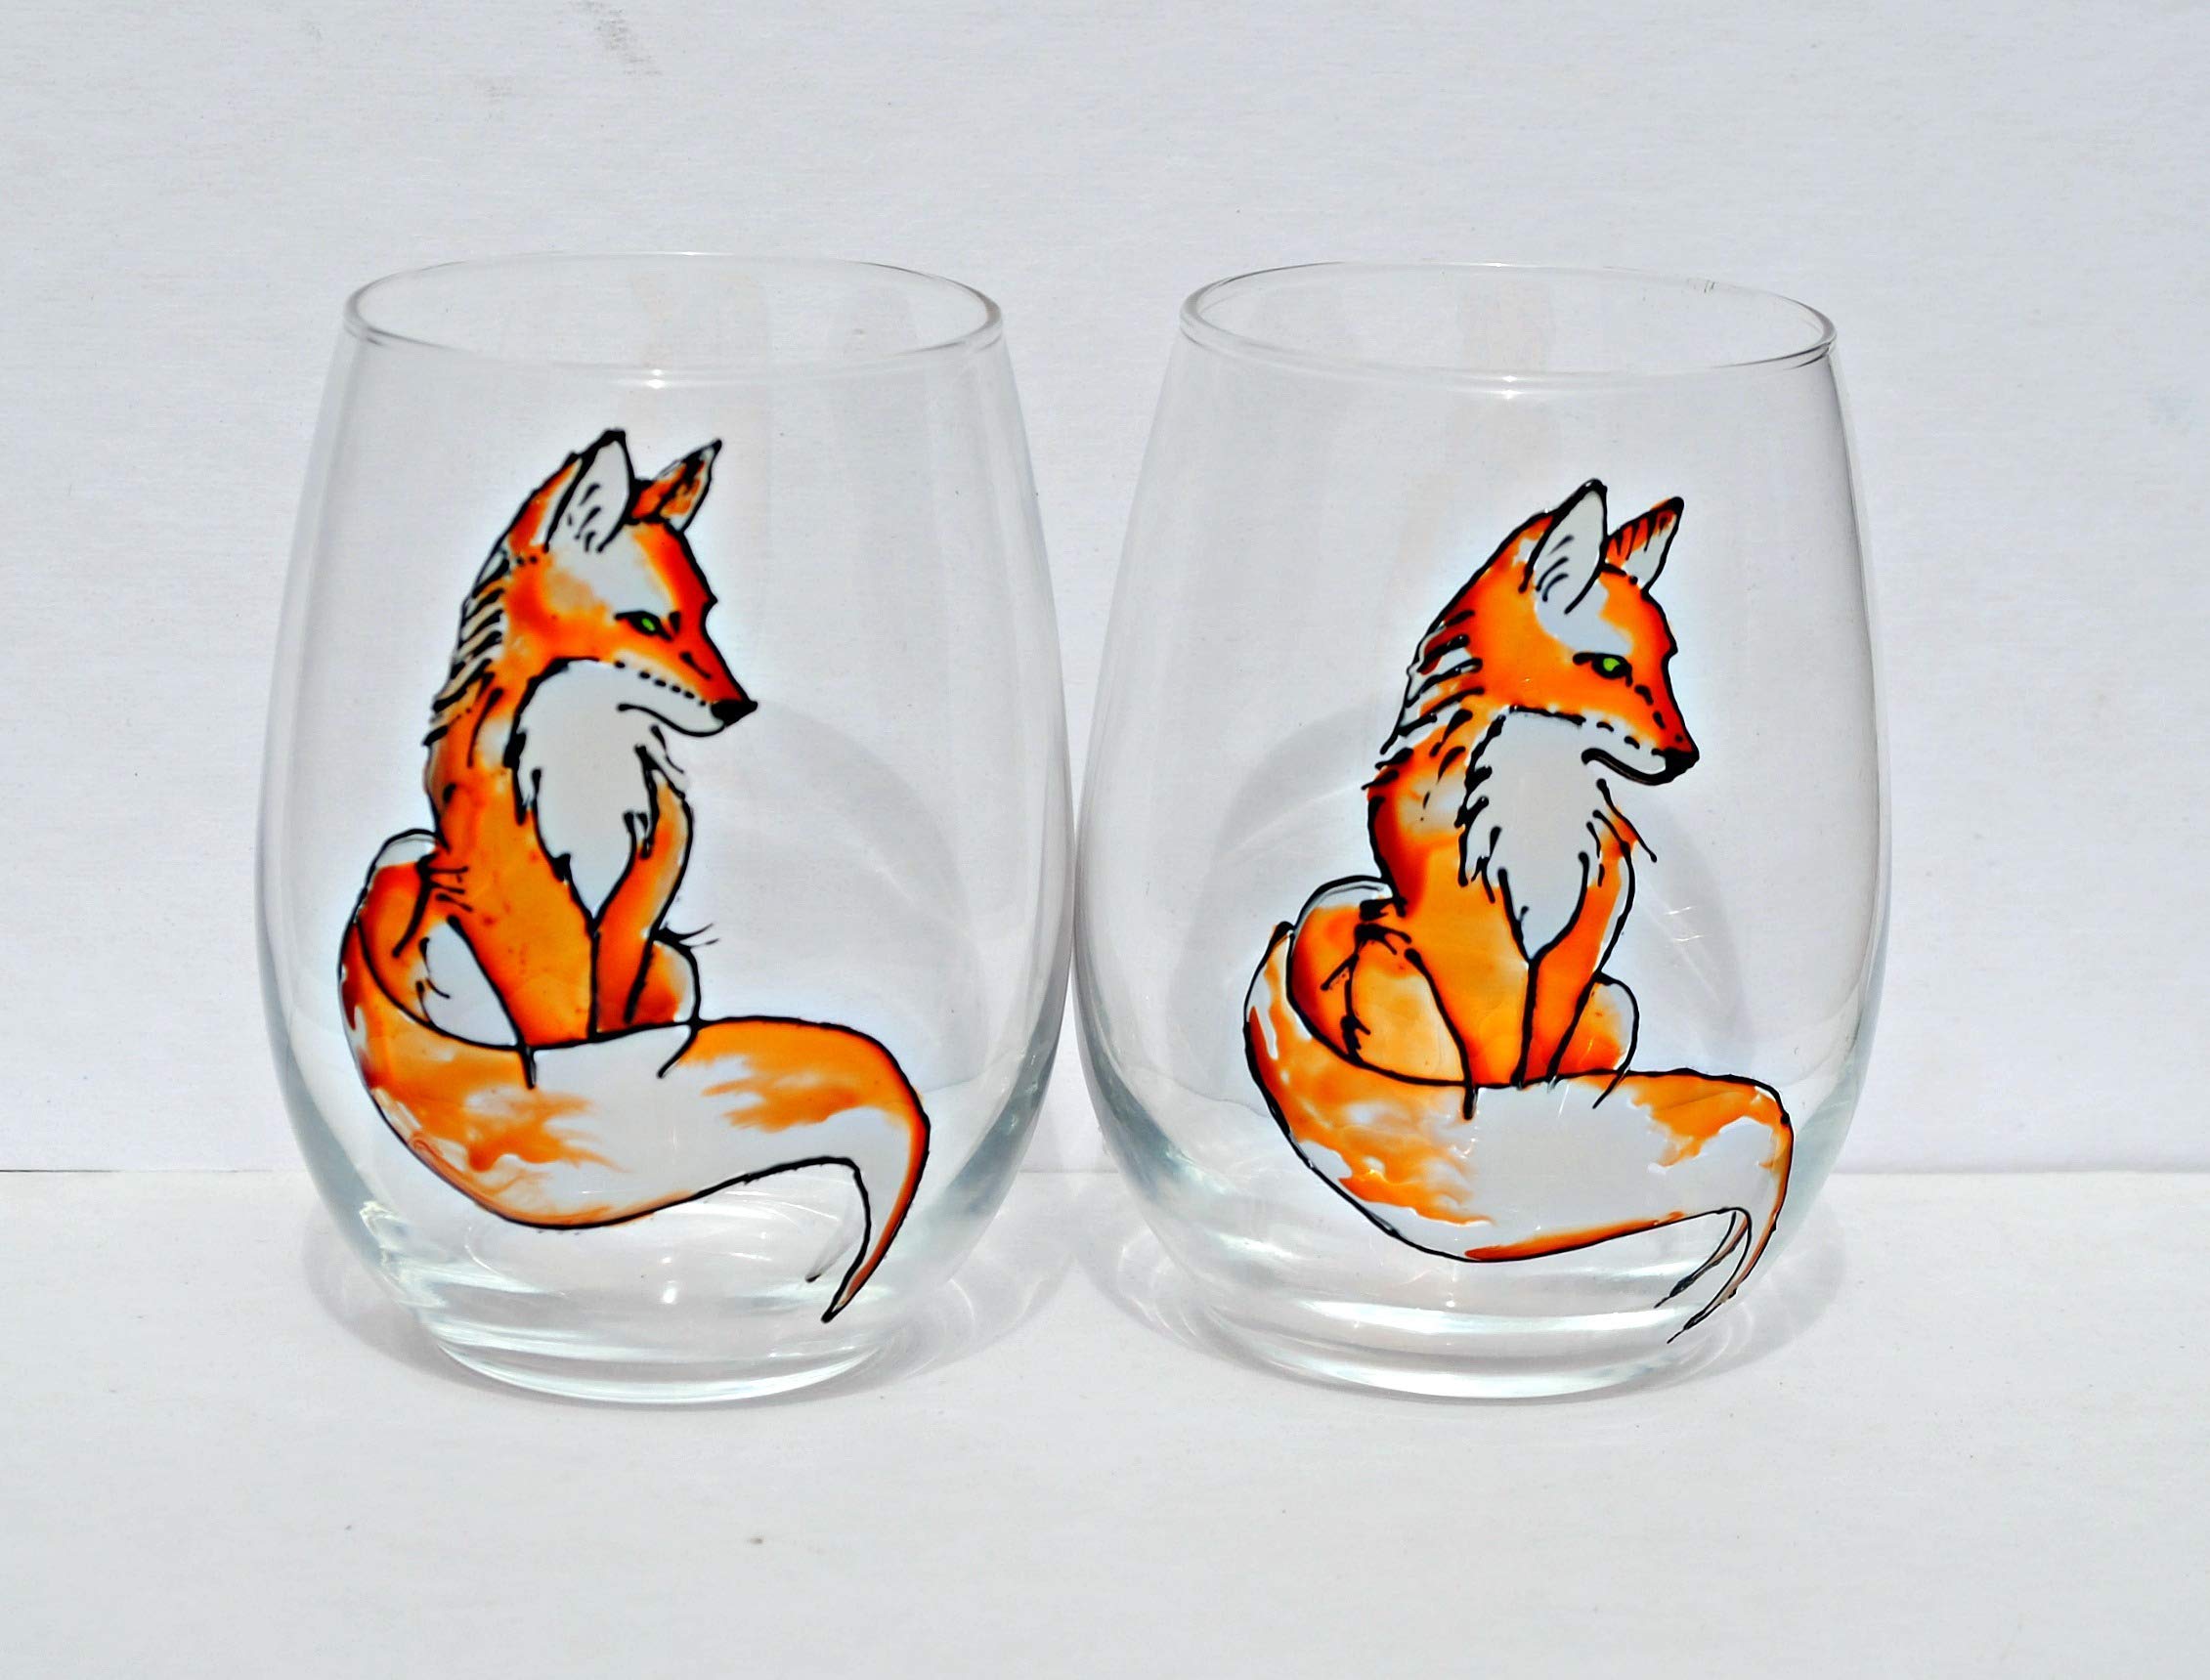 Red Fox Hand Painted Stemless Wine Glass Set of 2 Fall Farmhouse Home Decor